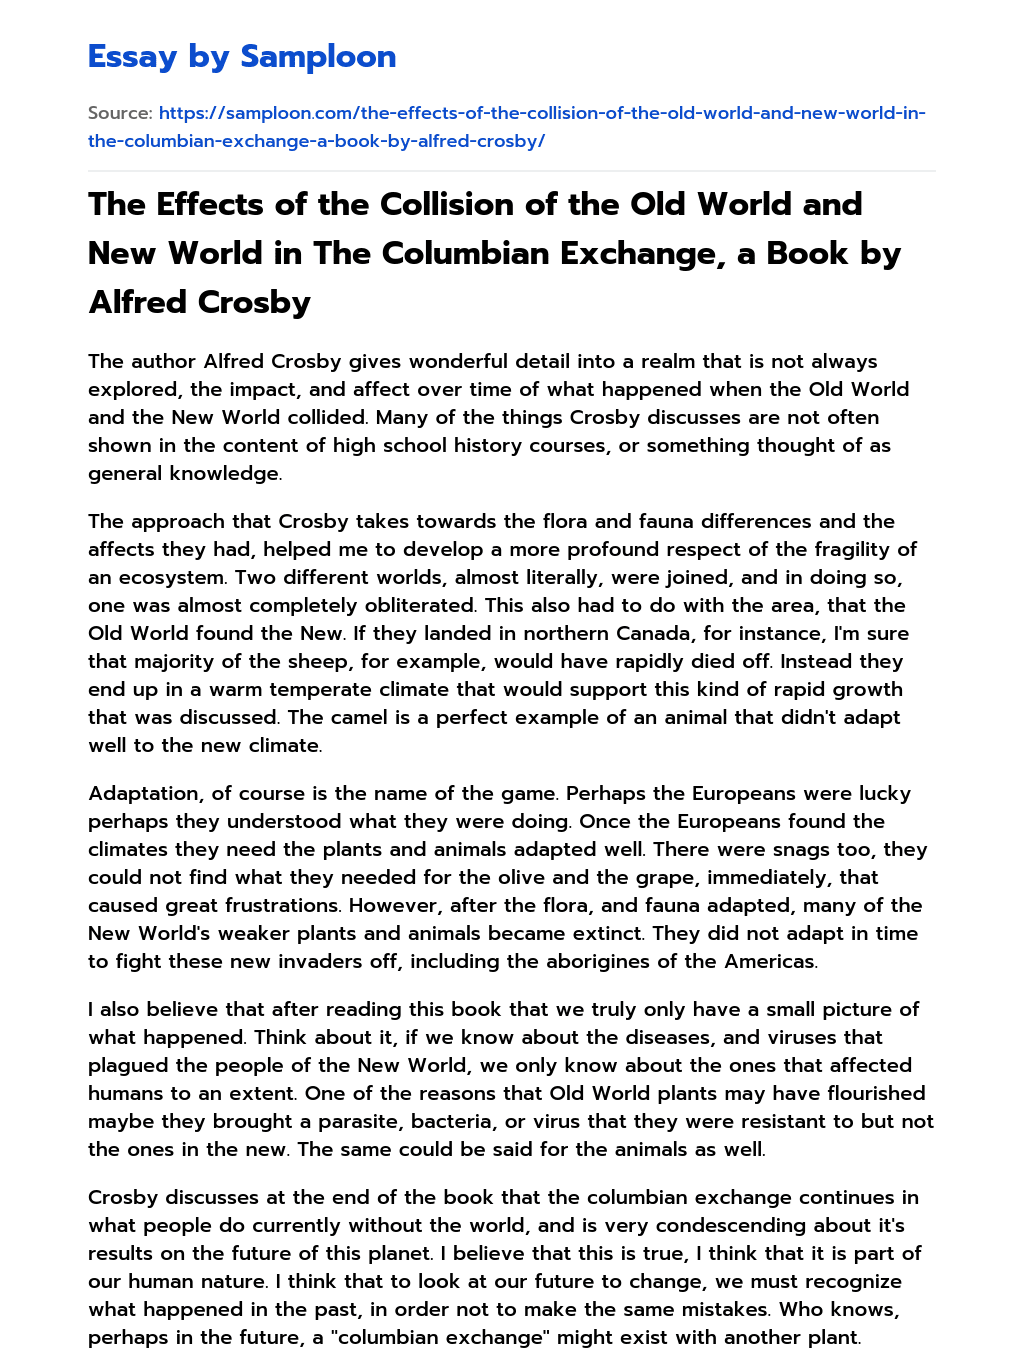 The Effects of the Collision of the Old World and New World in The Columbian Exchange, a Book by Alfred Crosby essay